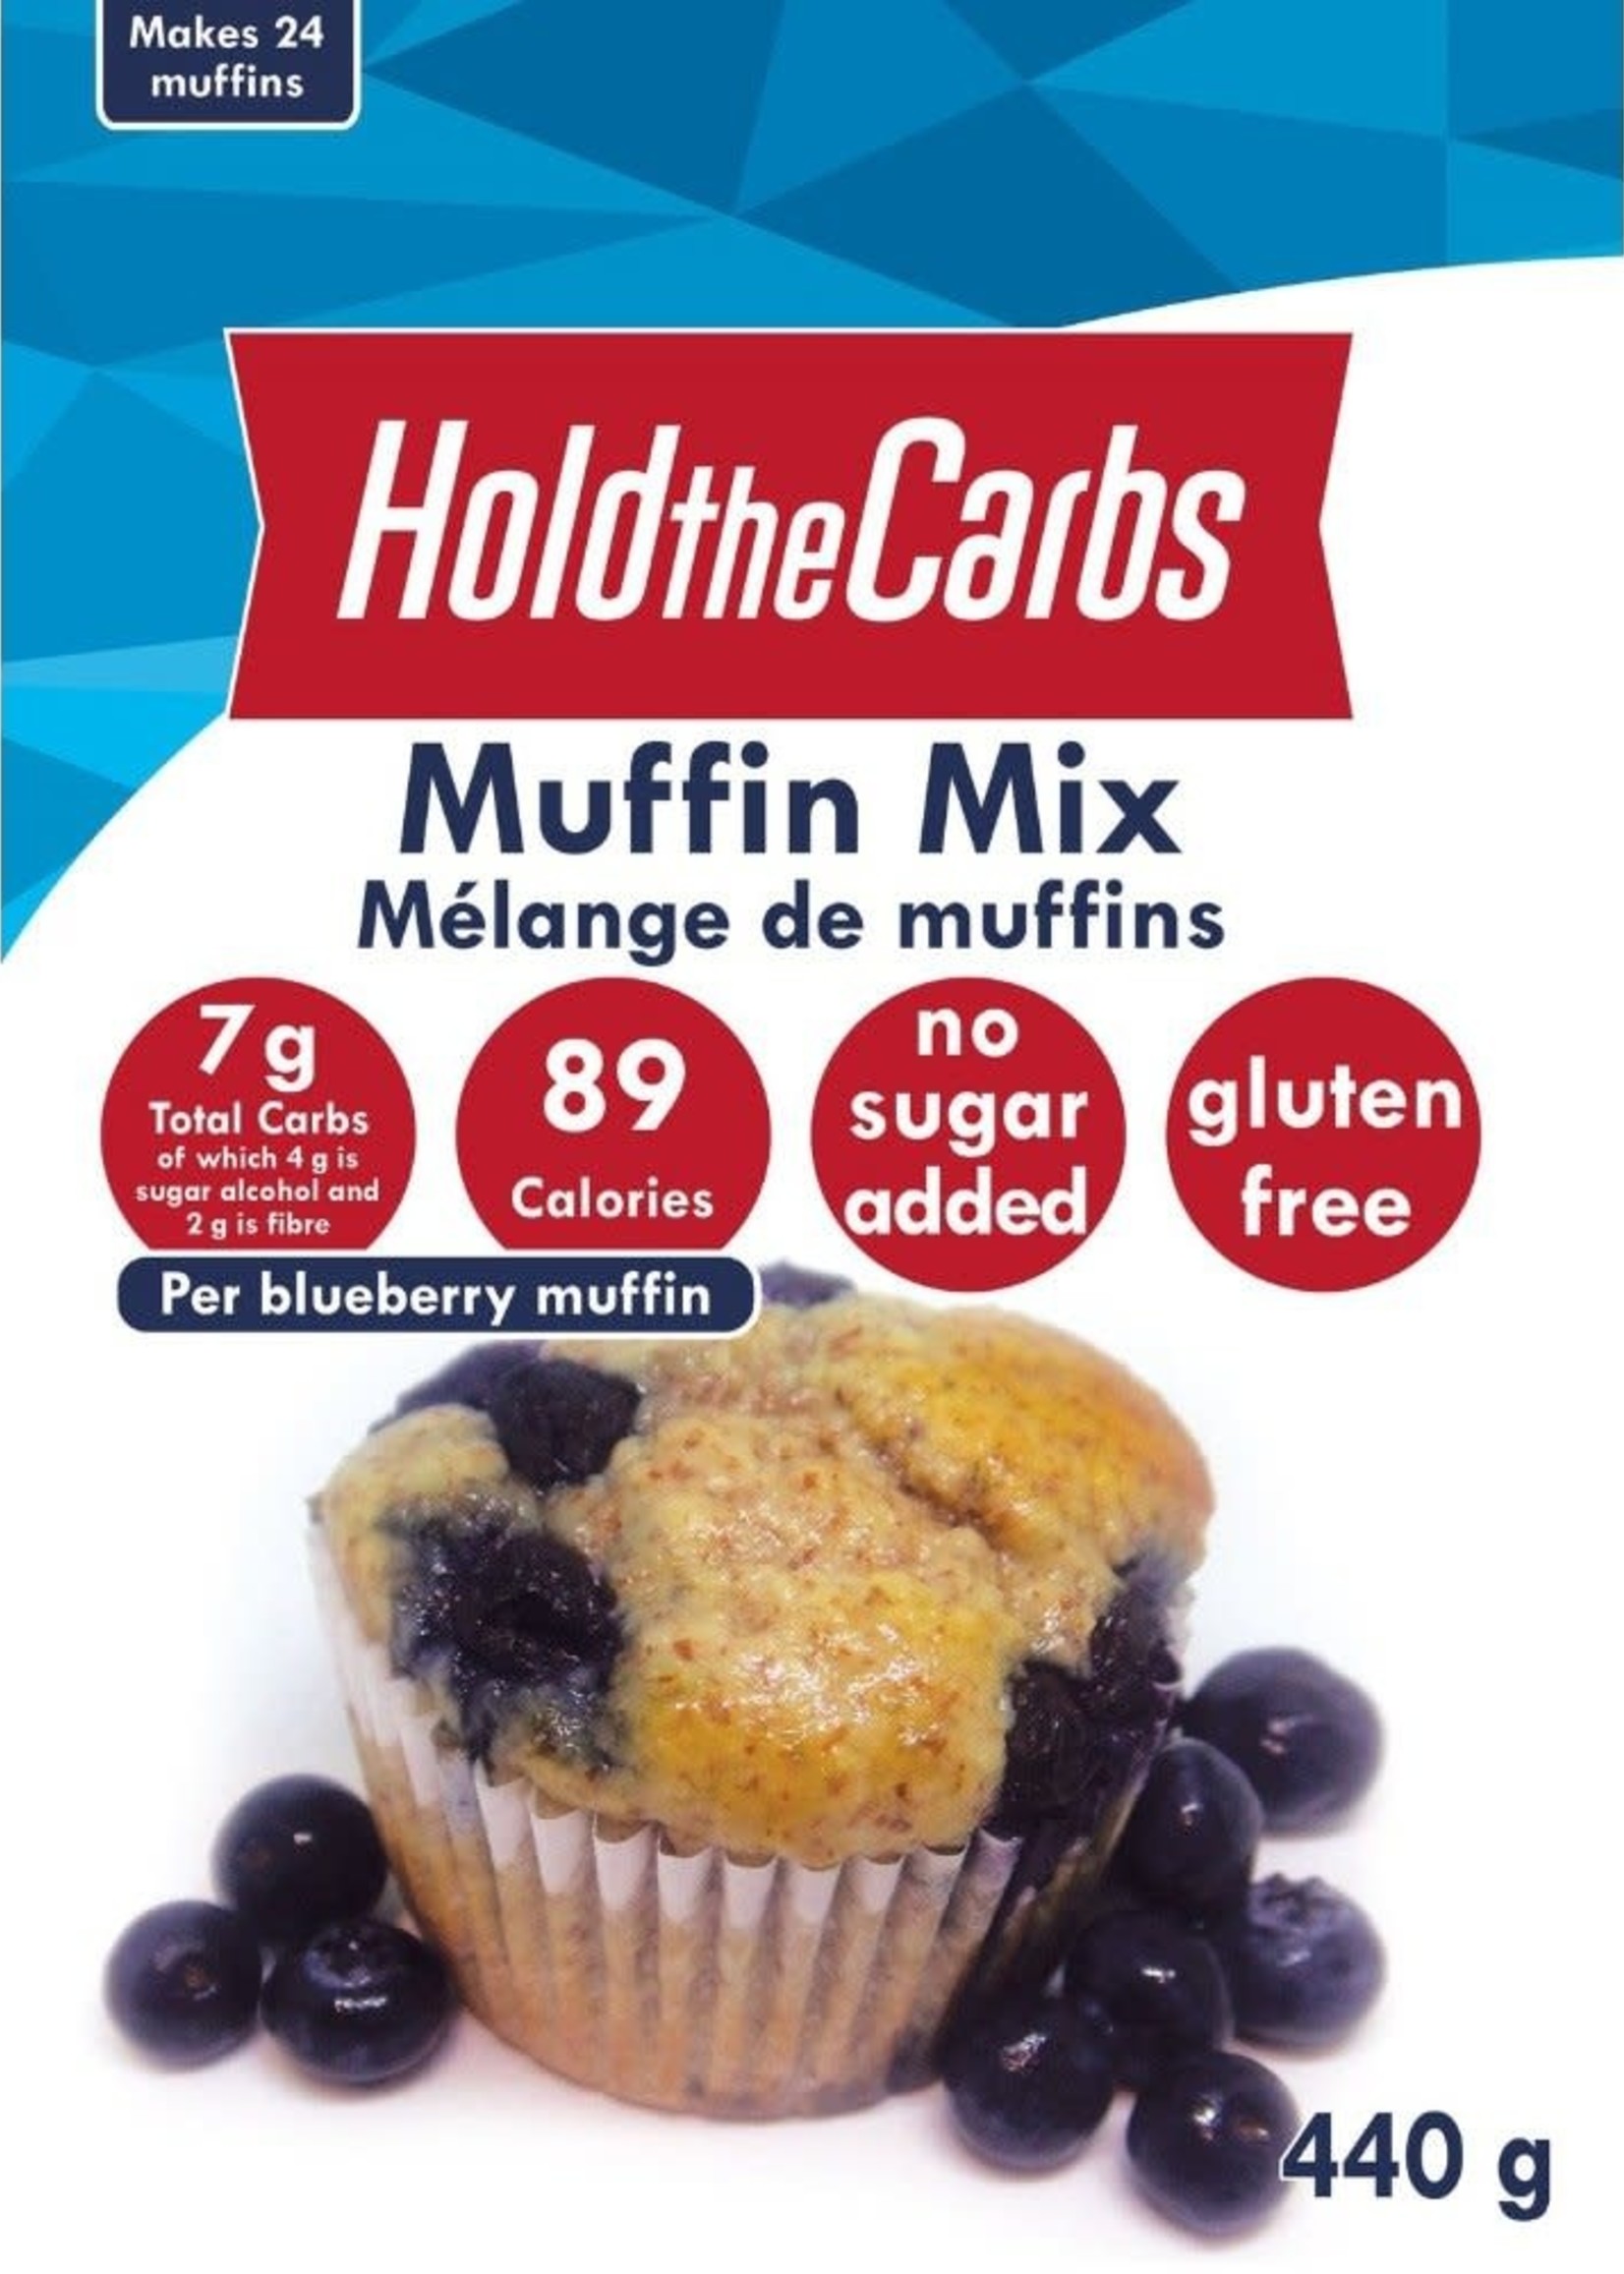 Hold The Carbs Mélanges à muffins - Hold the Carbs